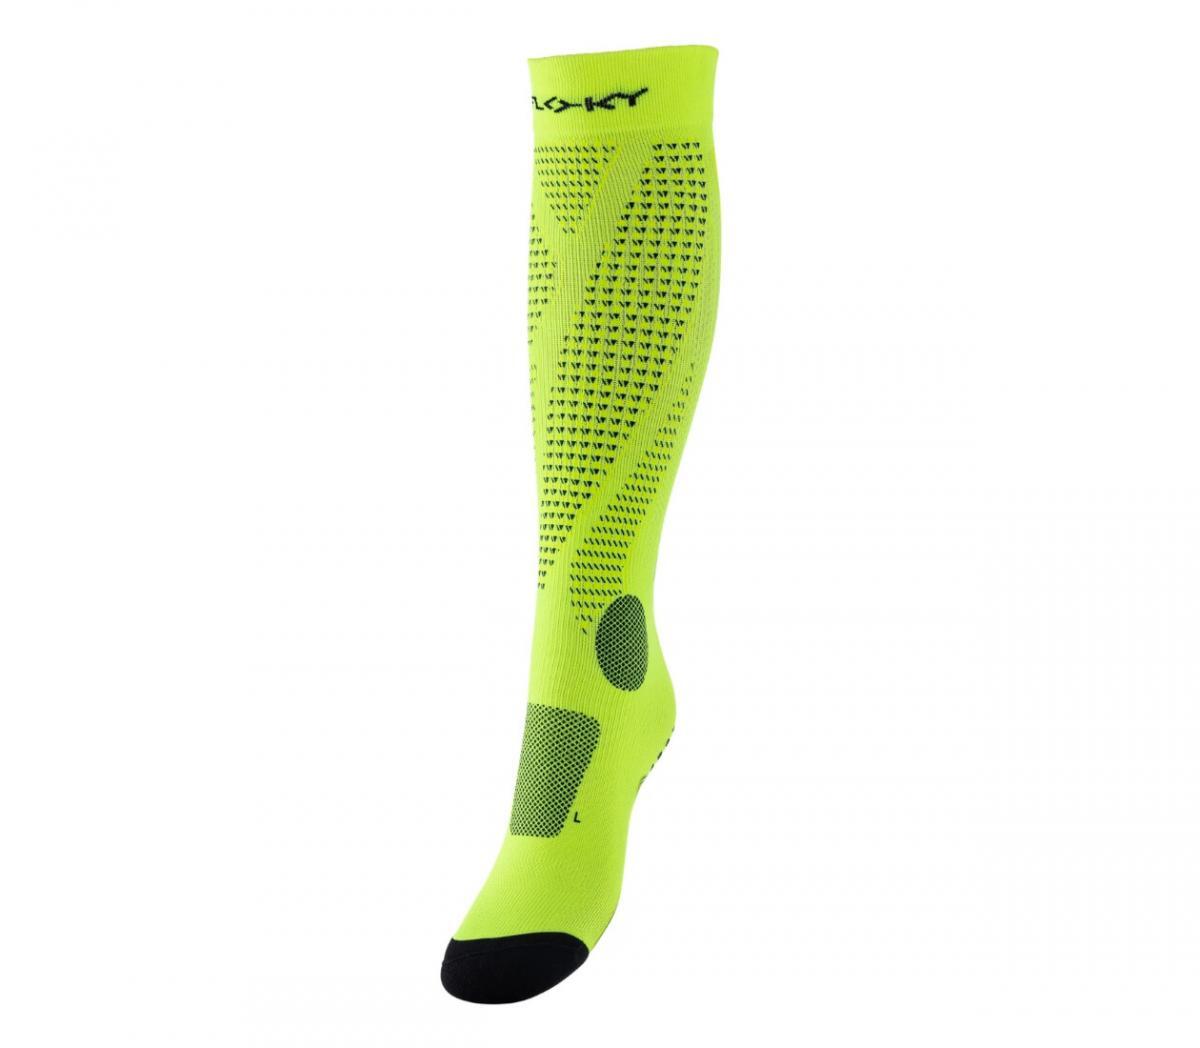 calza a compressione floky run up giallo fluo